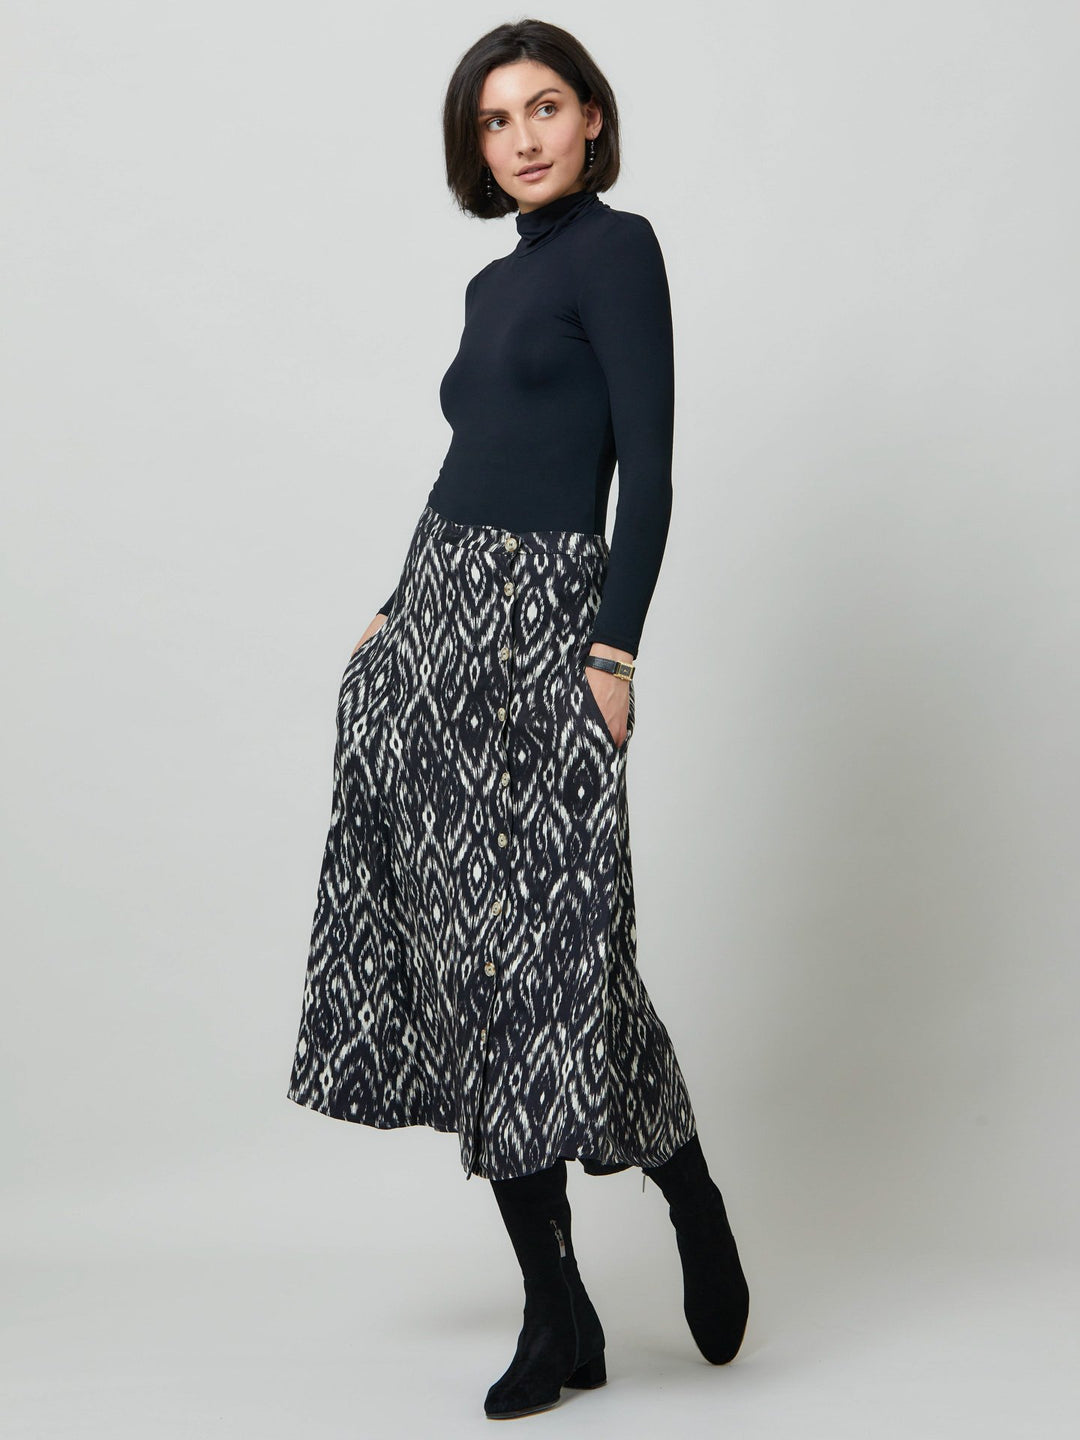 Meet saddie, the essential transeasonal skirt. Crafted in a fluid black and cream ikat printed viscose.. Off centered button through a-line silhouette with an elasticated back waist band. Relaxed elegance for everyday life. Style with our black timeless tops or dress it down with the khloe oatmeal sweatshirt.